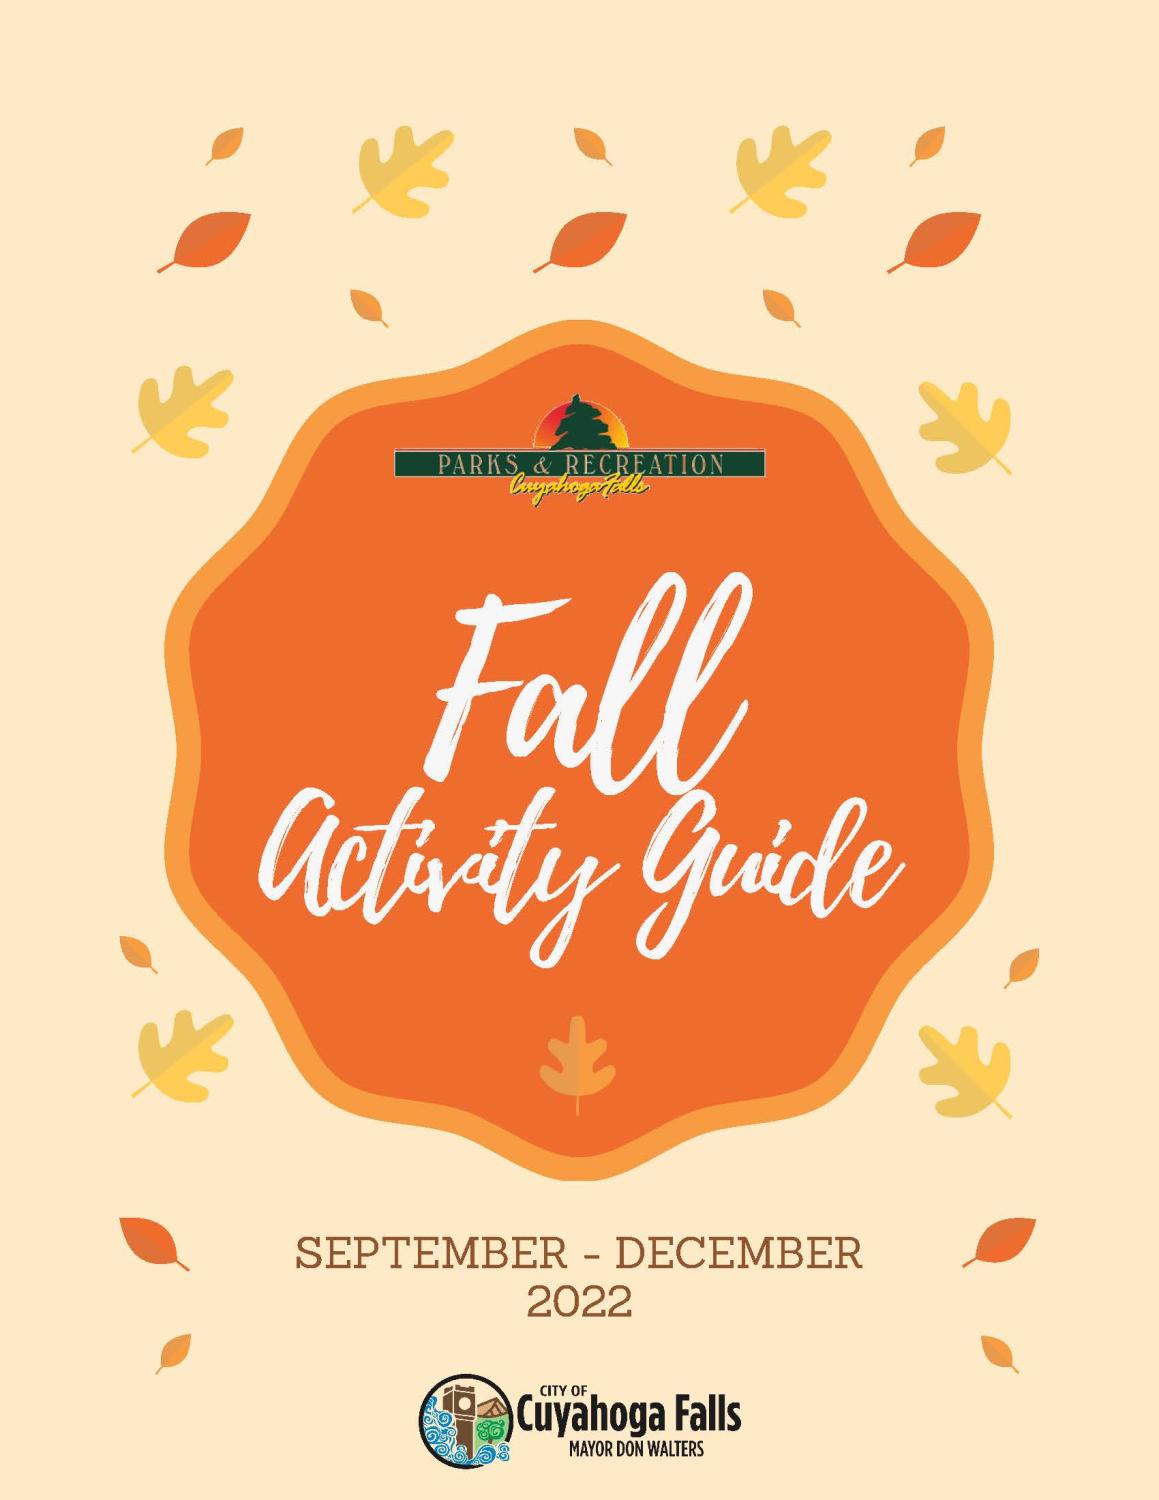 Fall activity guide